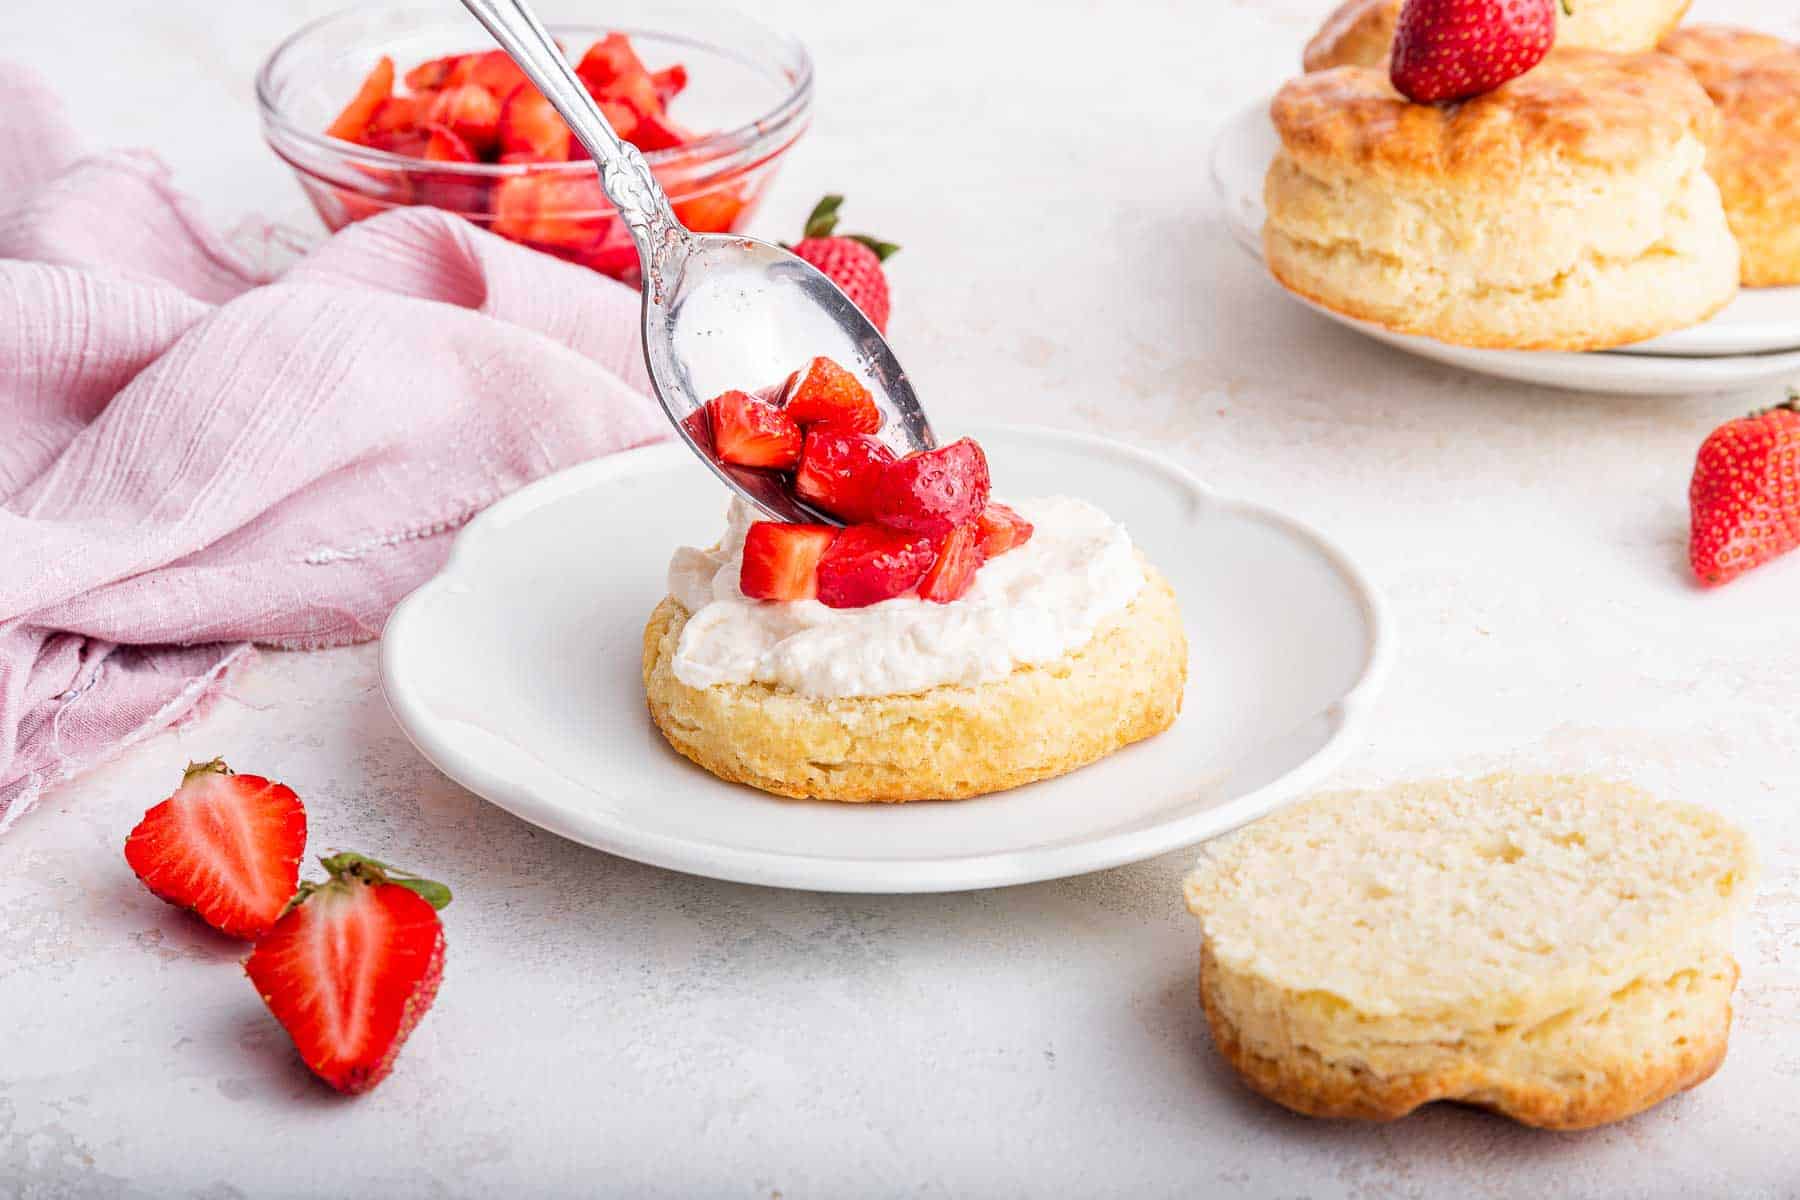 Horizontal image of biscuit cut in half, being layered with whipped cream and strawberries.